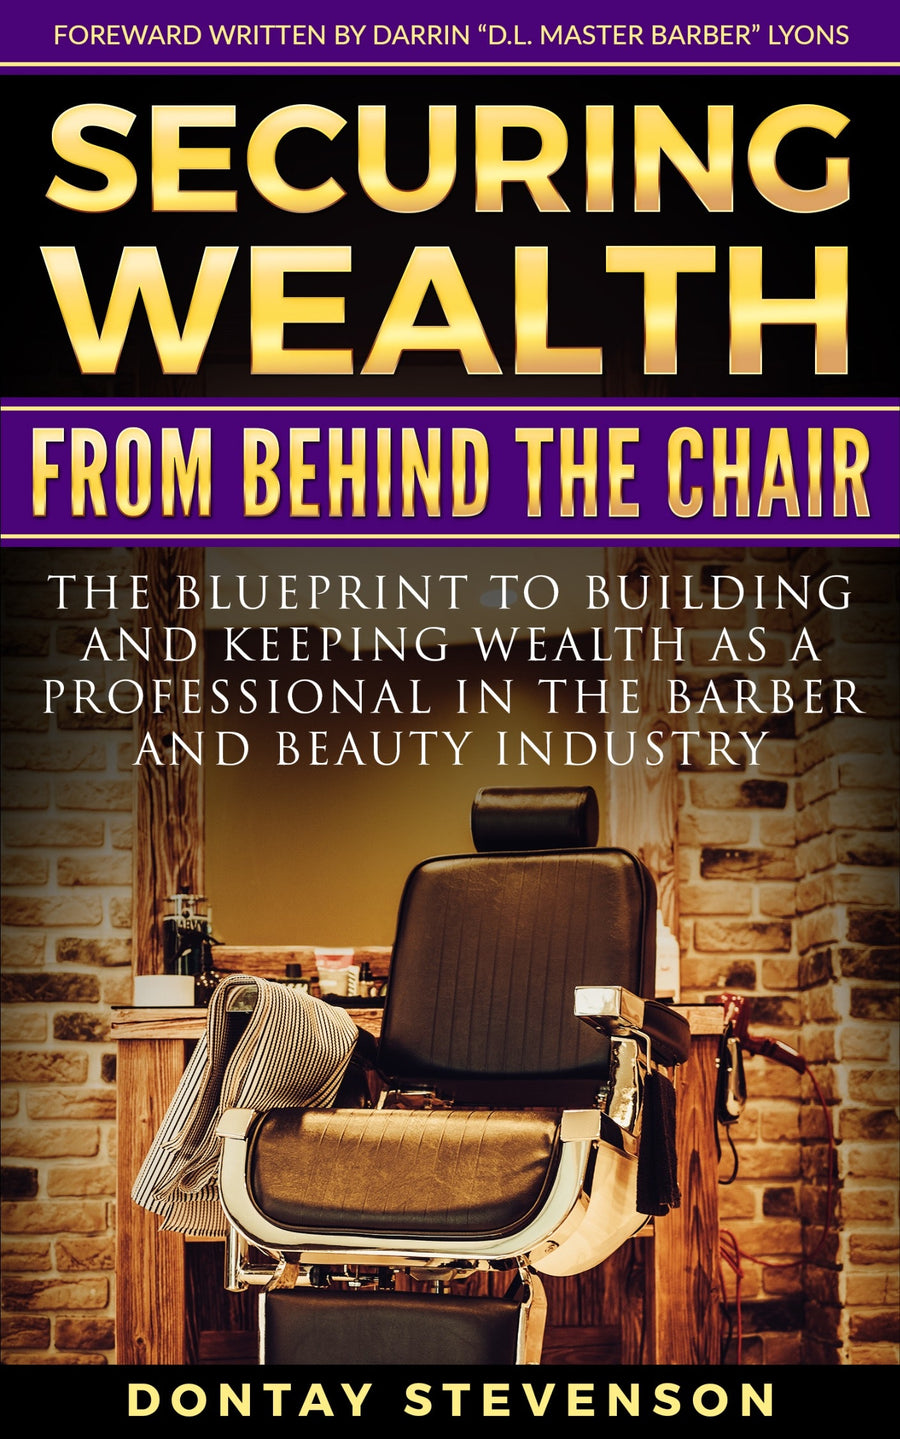 Securing Wealth From Behind The Chair | by Dontay Stevenson | Paperback